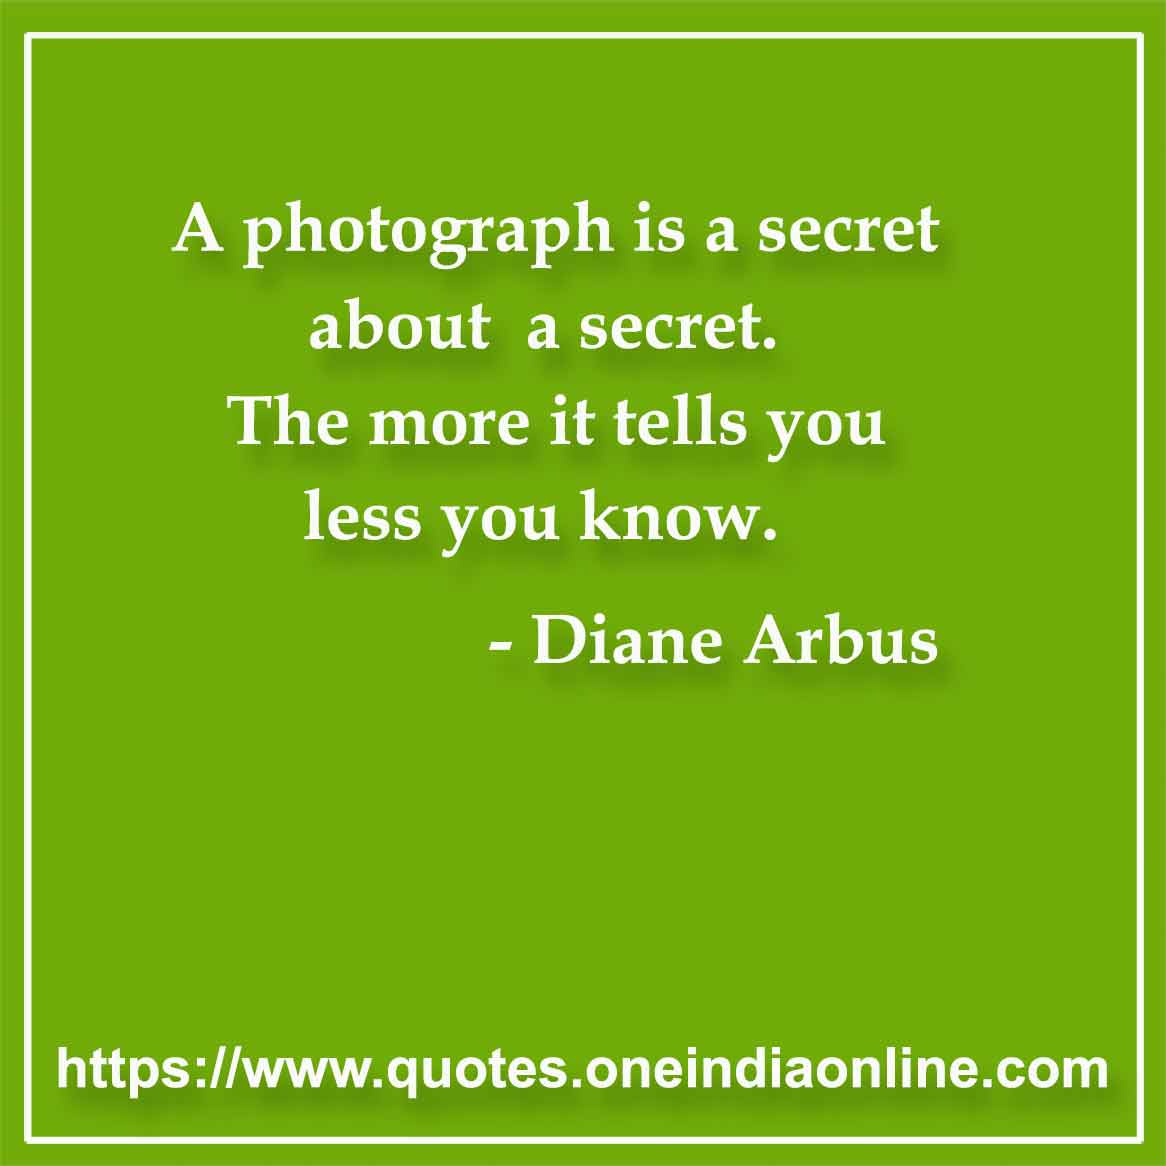 A photograph is a secret about a secret. The more it tells you less you know.

- Photography Quotes by Diane Arbus 